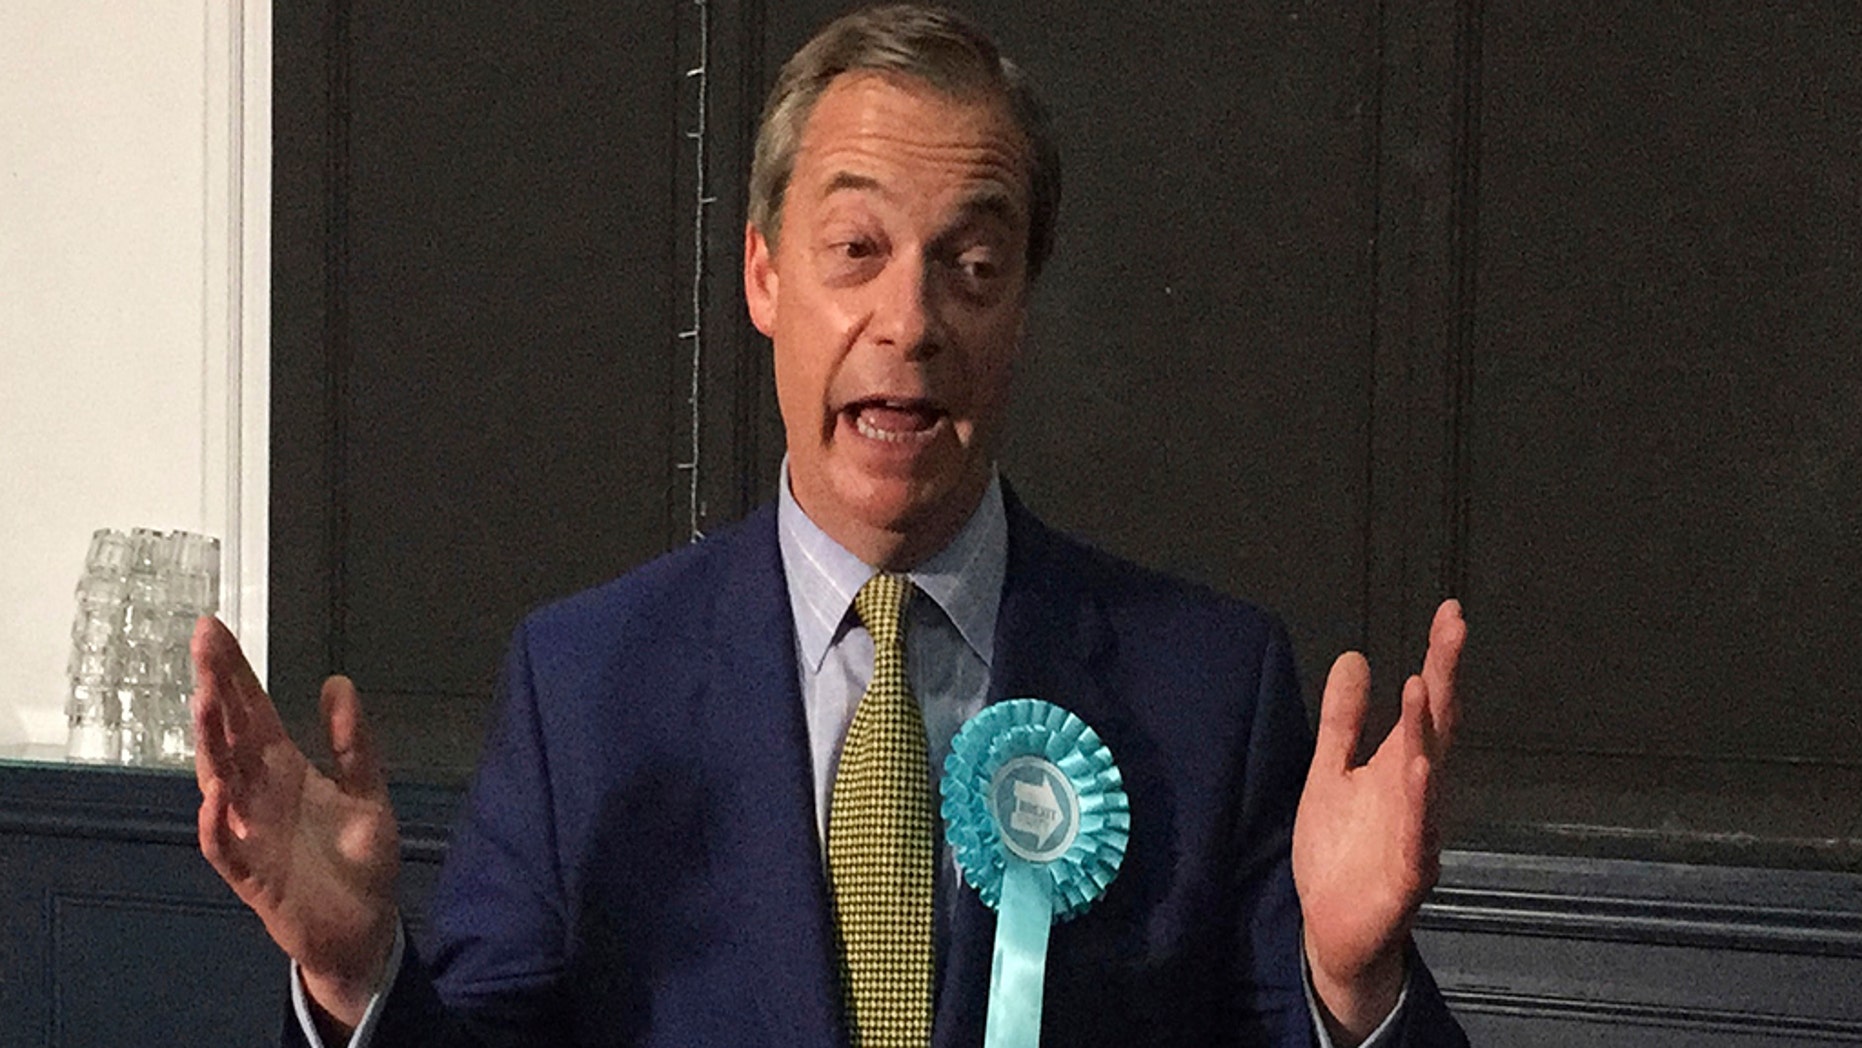 Brexit party leader Nigel Farage made gestures at his party's rally at the Corn Exchange in Edinburgh on Friday, May 17, 2019. (Tom Eden / PA via AP)